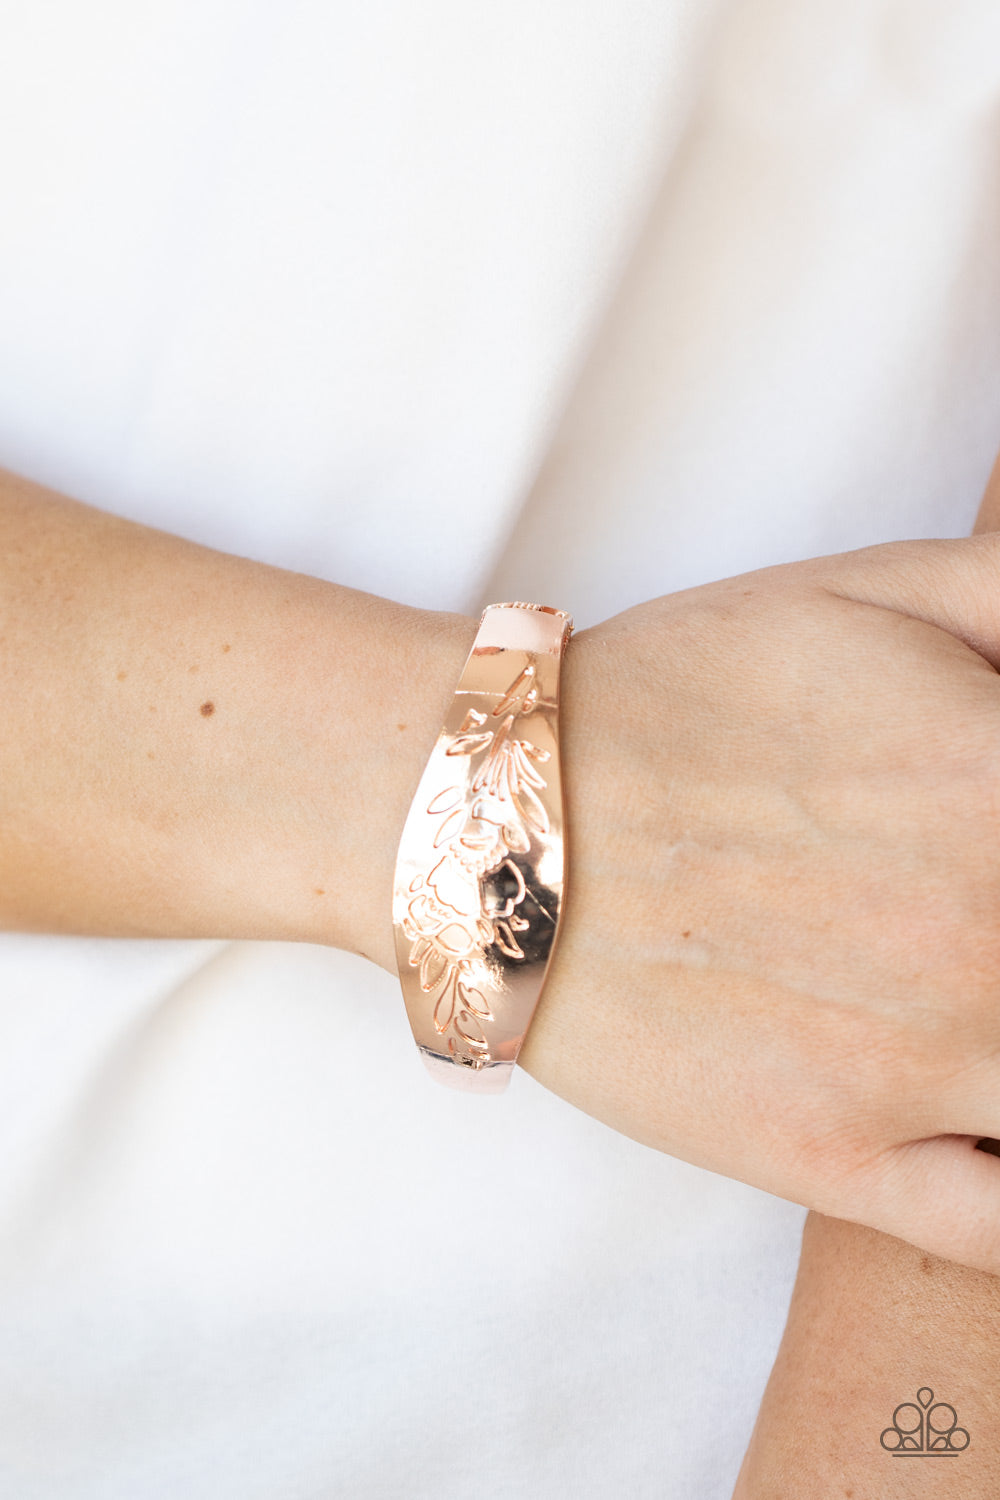 Fond of Florals Rose Gold Bracelet - Paparazzi Accessories  The front of a thick rose gold bangle-like bracelet is stamped in a leafy floral pattern, creating a whimsy centerpiece around the wrist. Features a hinged closure.  All Paparazzi Accessories are lead free and nickel free!  Sold as one individual bracelet.